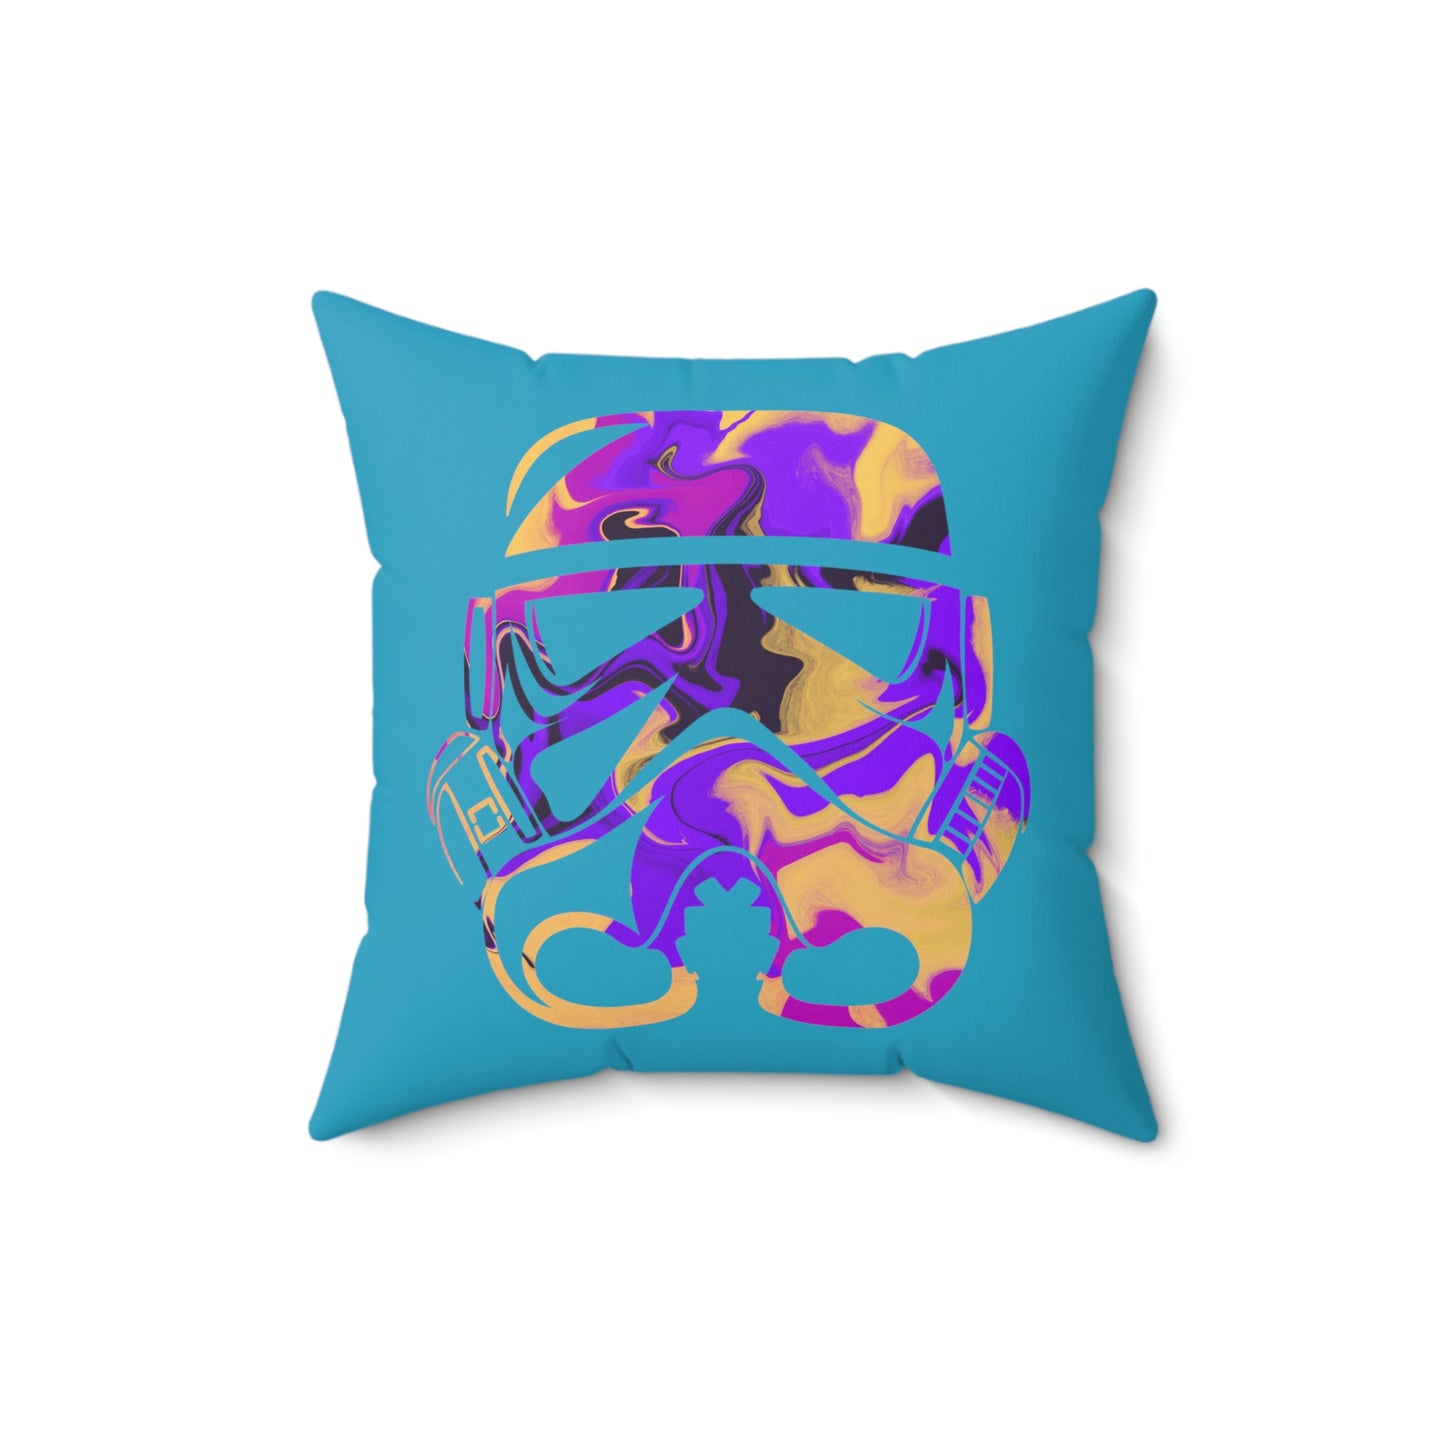 Spun Polyester Square Pillow Case ”Storm Trooper 14 on Turquoise”